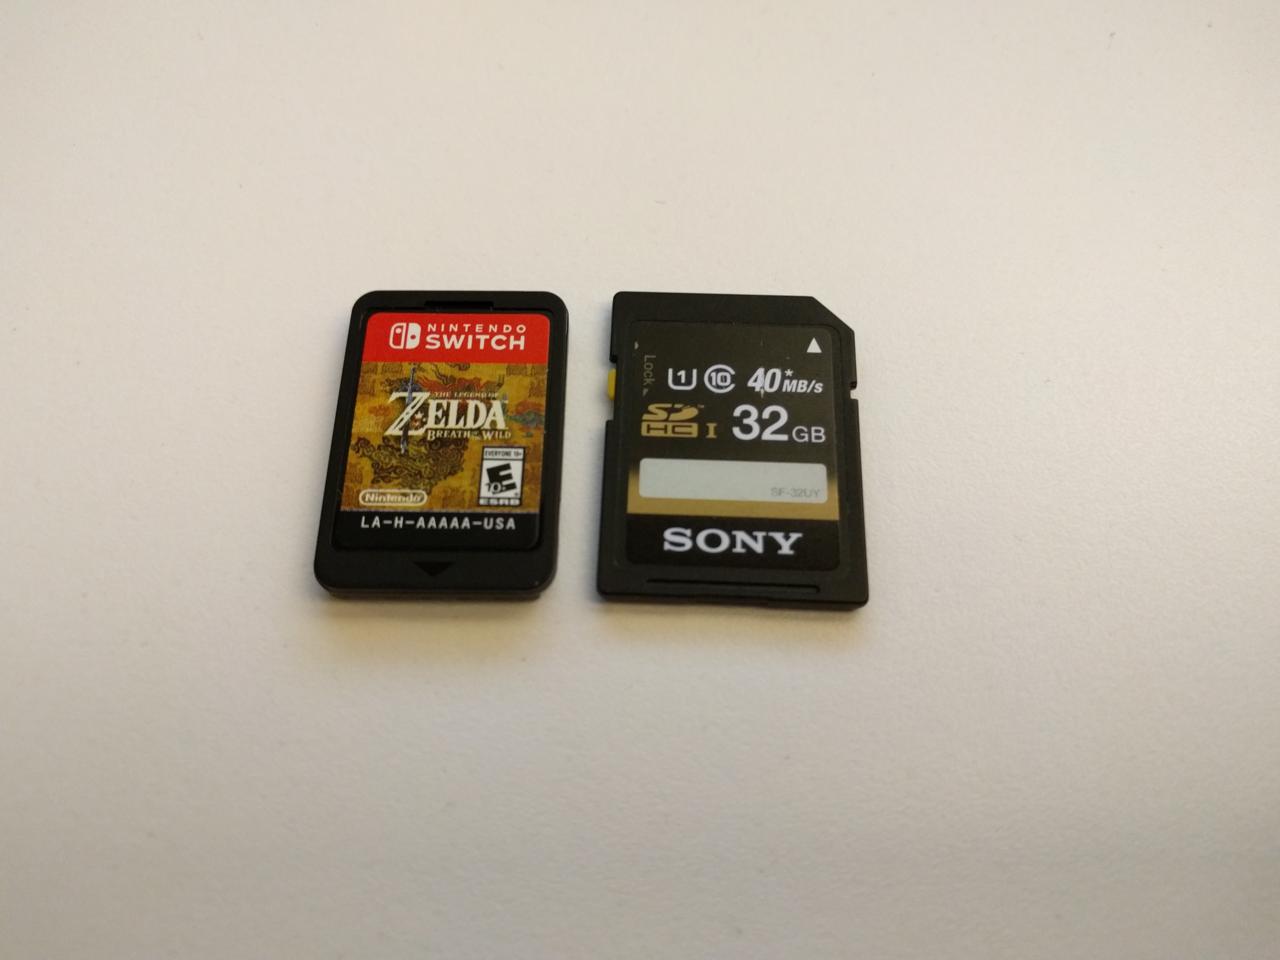 Switch Game Cards are roughly the size of SD cards.